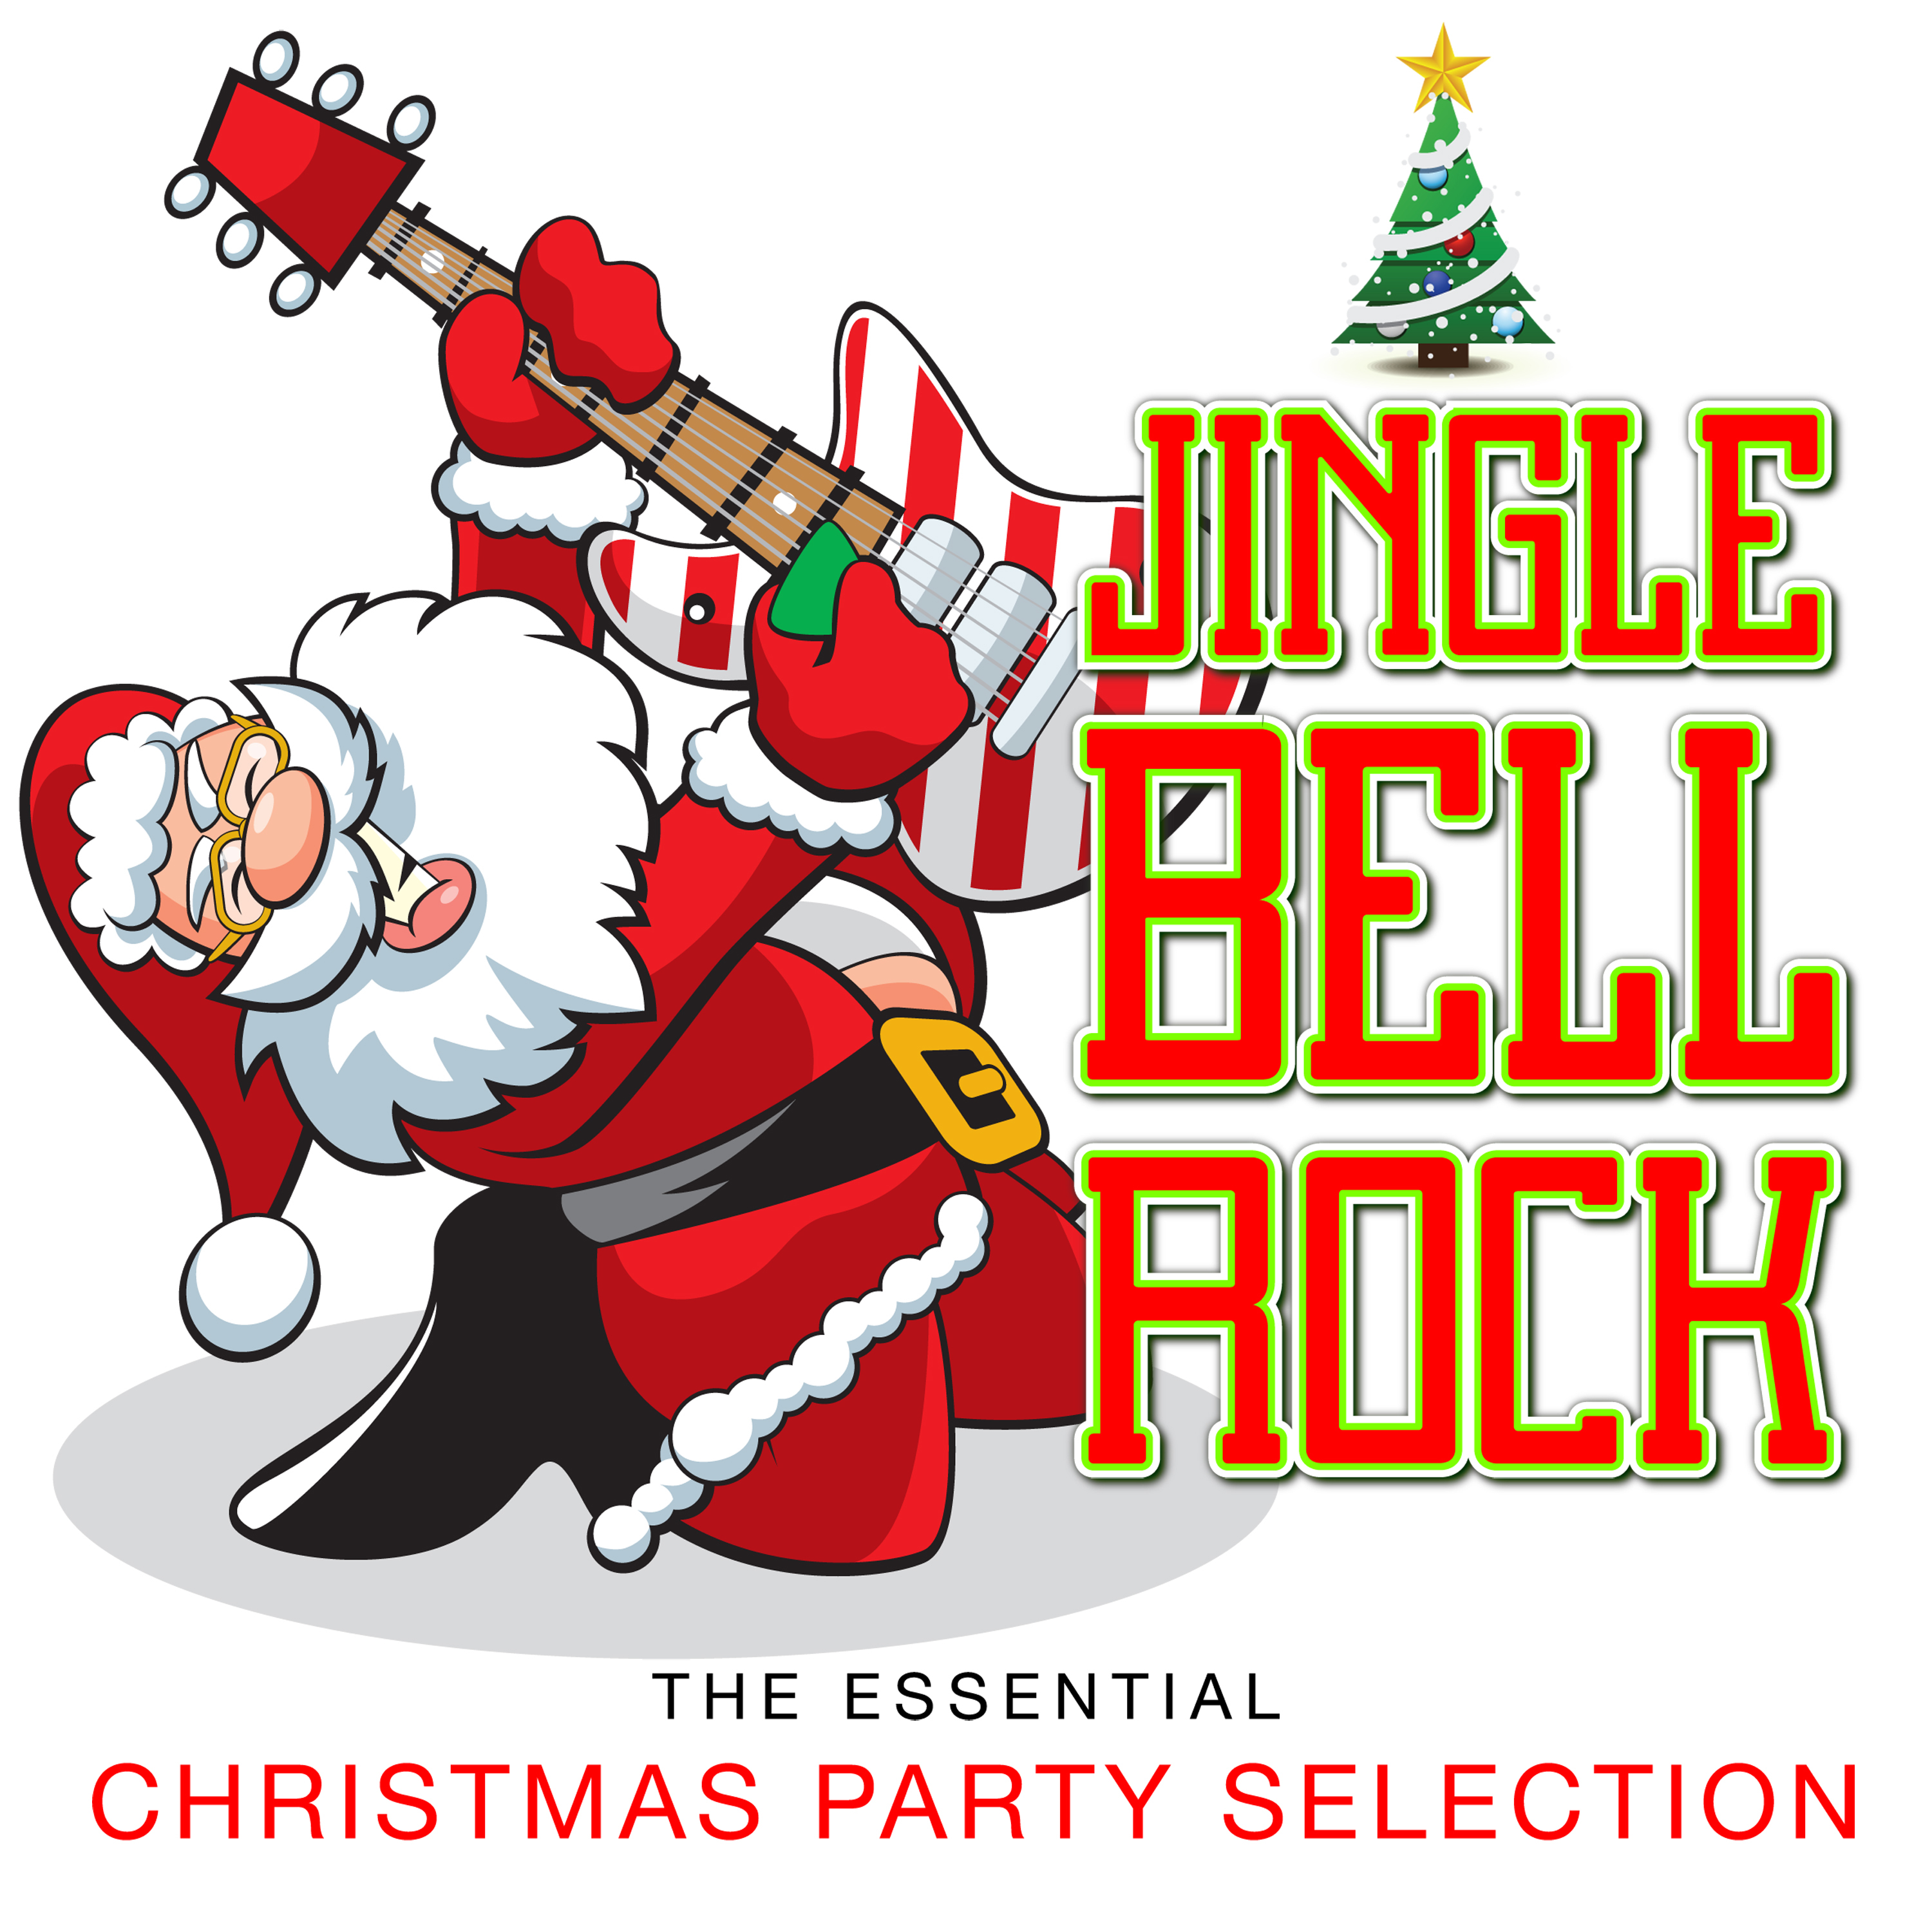 Jingle Bell Rock The Essential Christmas Party Selection